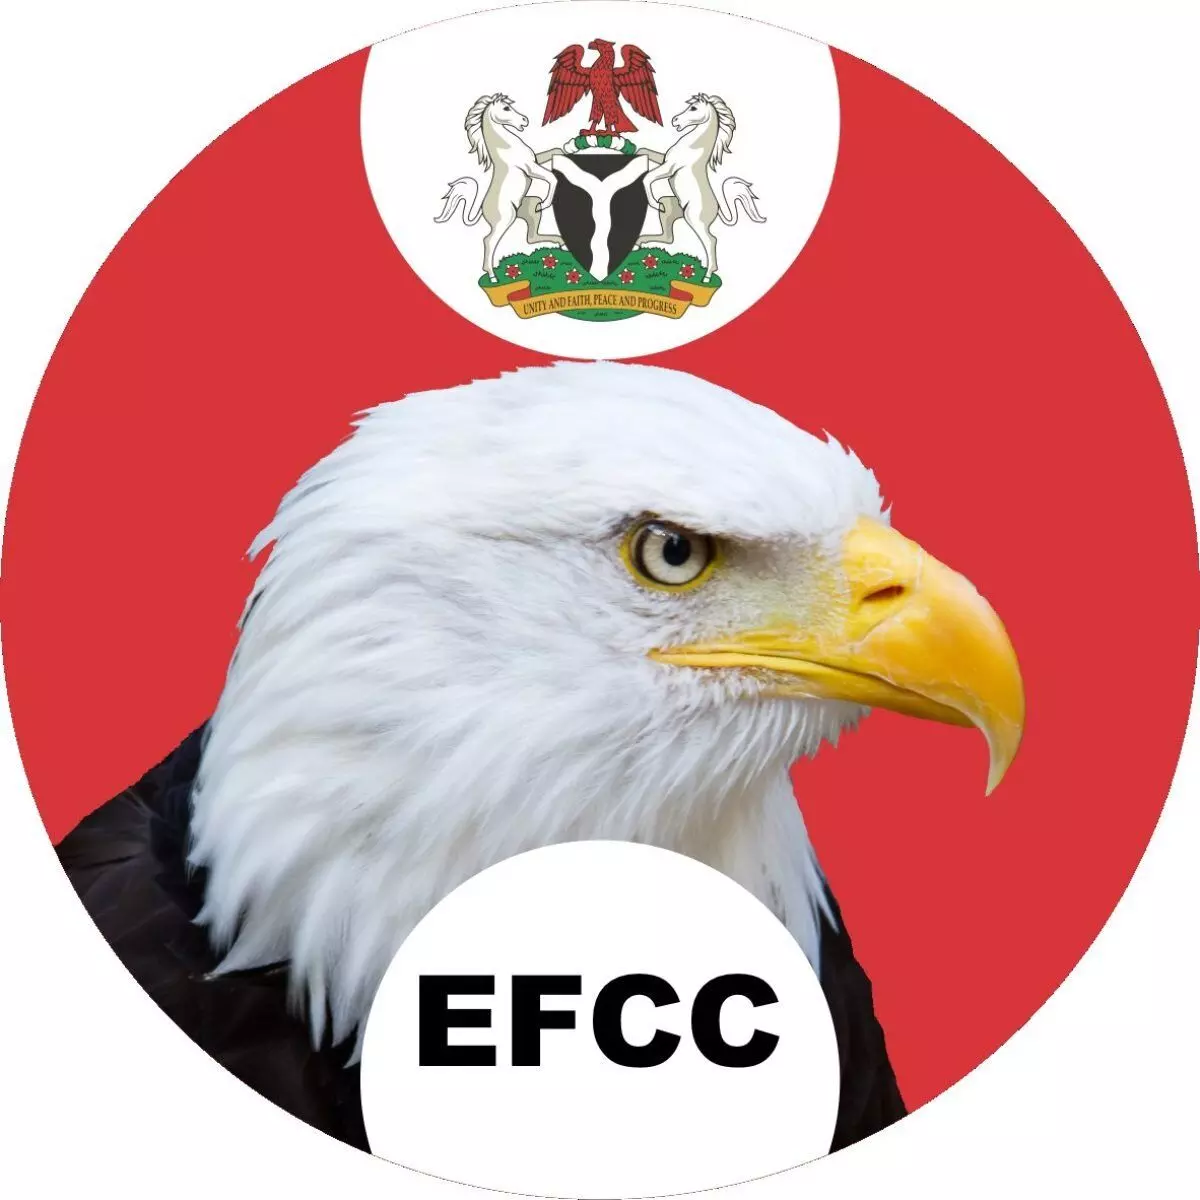 Reps threaten to hand over NCAA management to EFCC over missing N43bn revenue